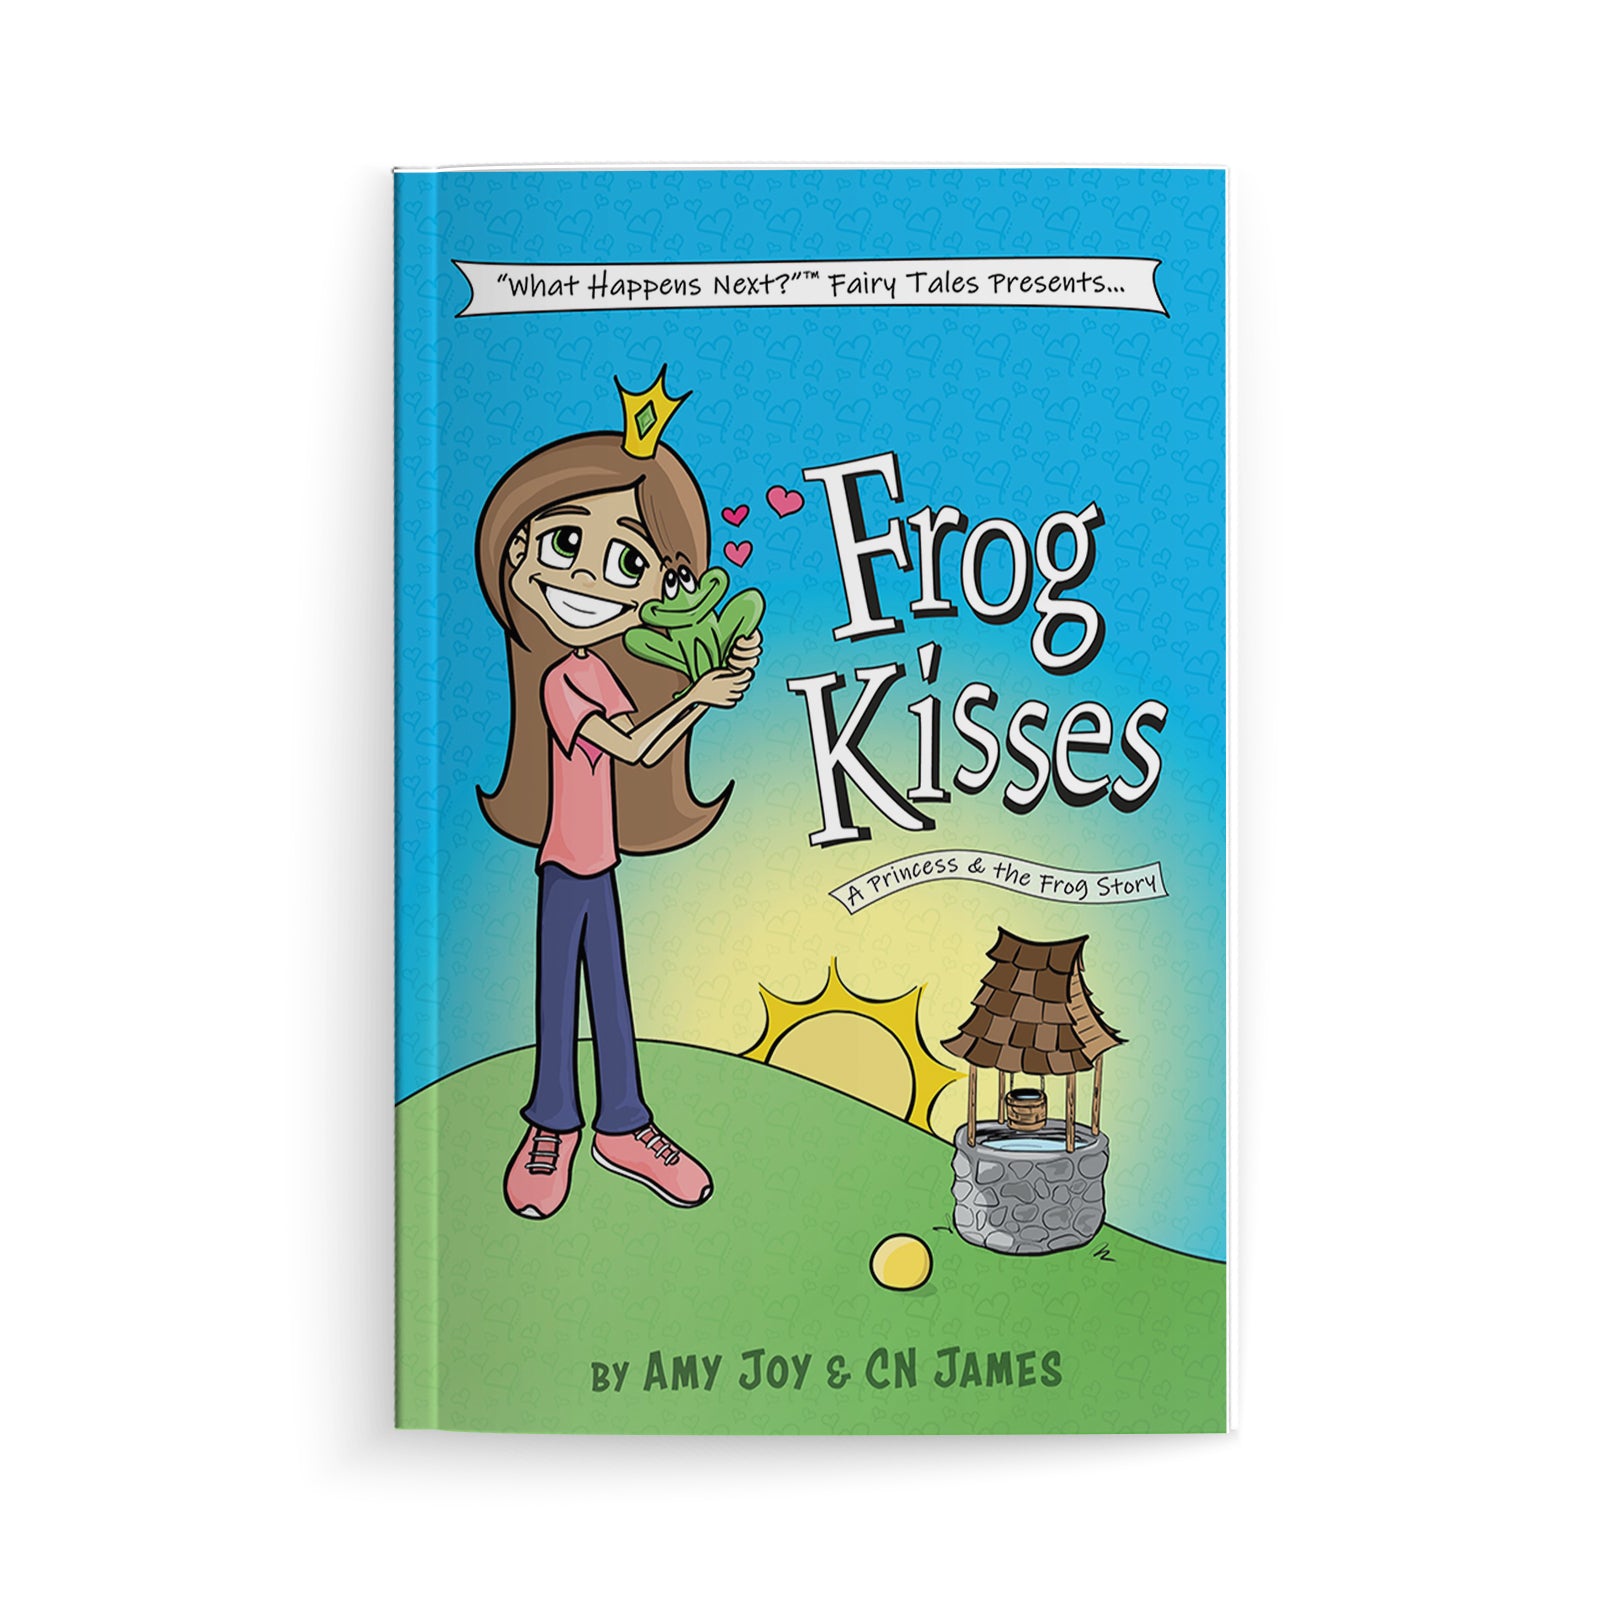 Paperback edition of Frog Kisses by Amy Joy and CN James displaying the front cover